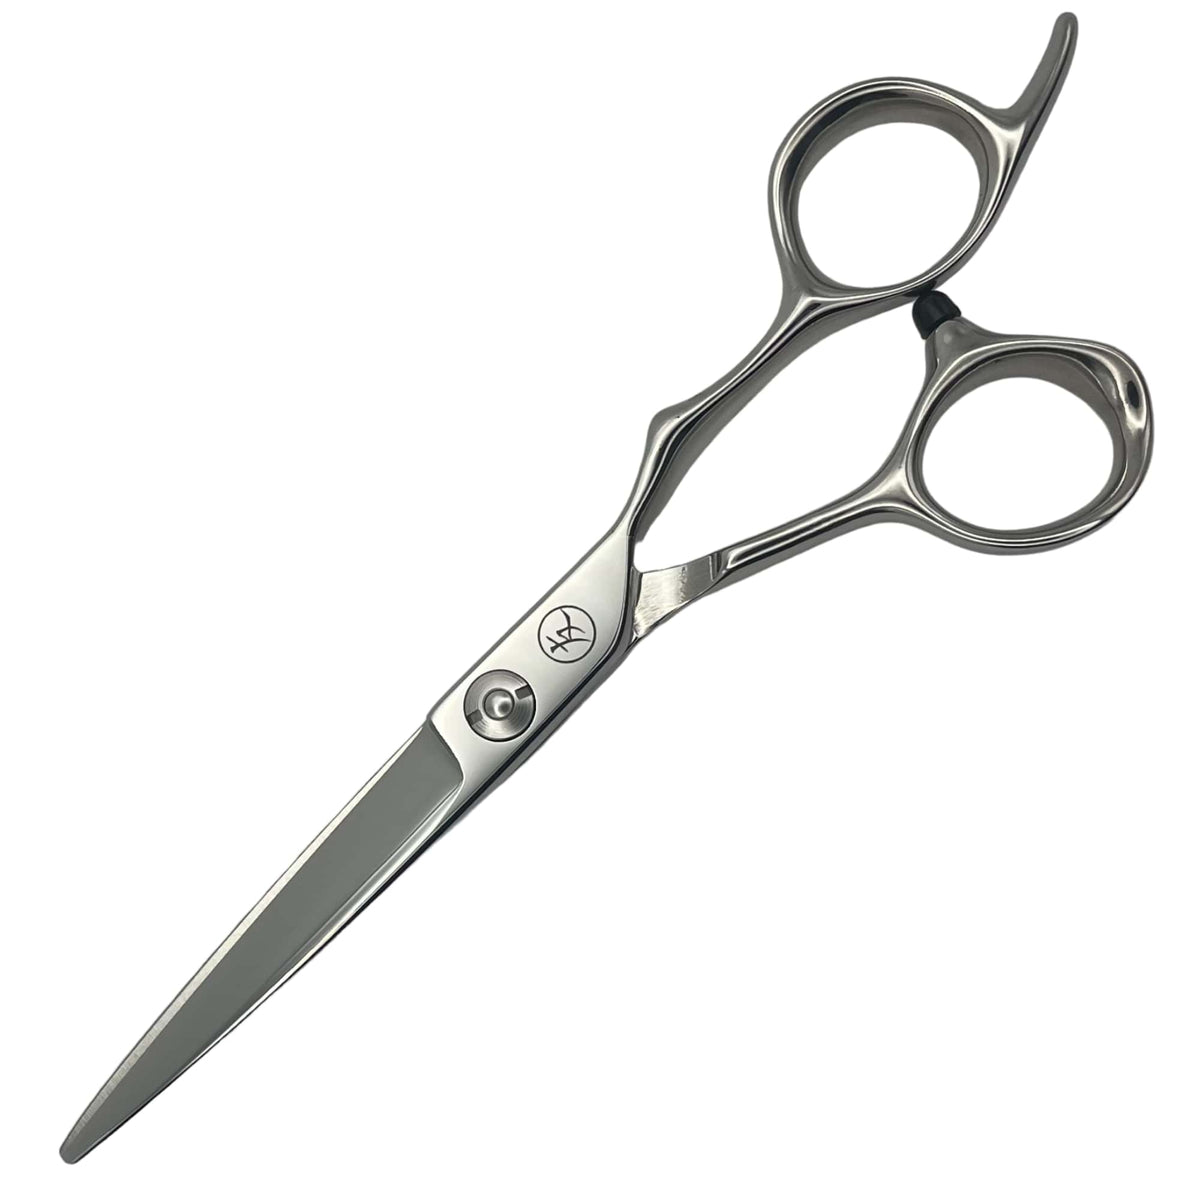 V-1 6.0 inch Hairdressing Scissors and Hair Cutting Scissors